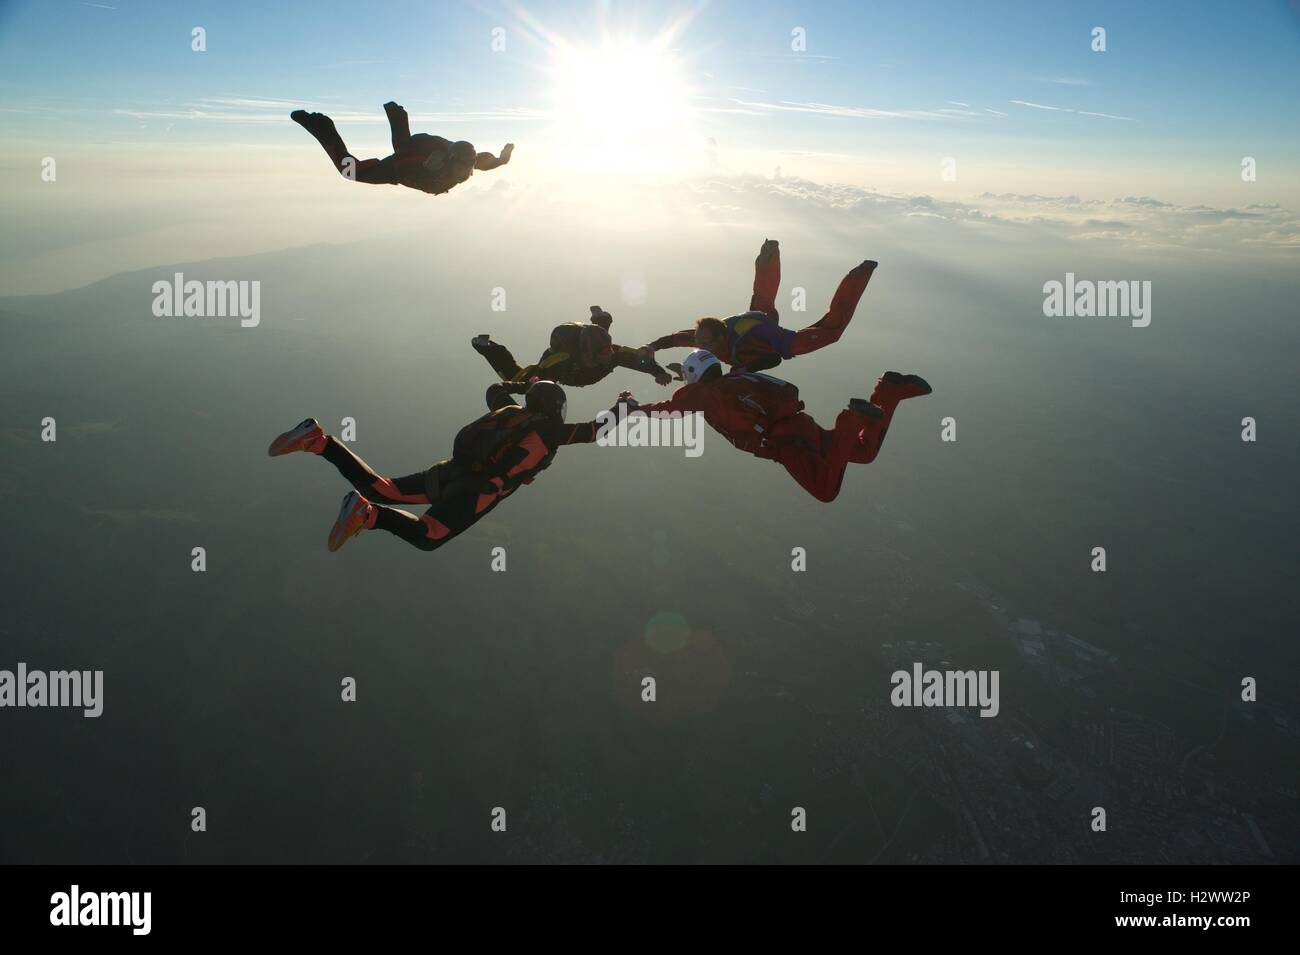 A skydiver closing in on a formation in freefall Stock Photo